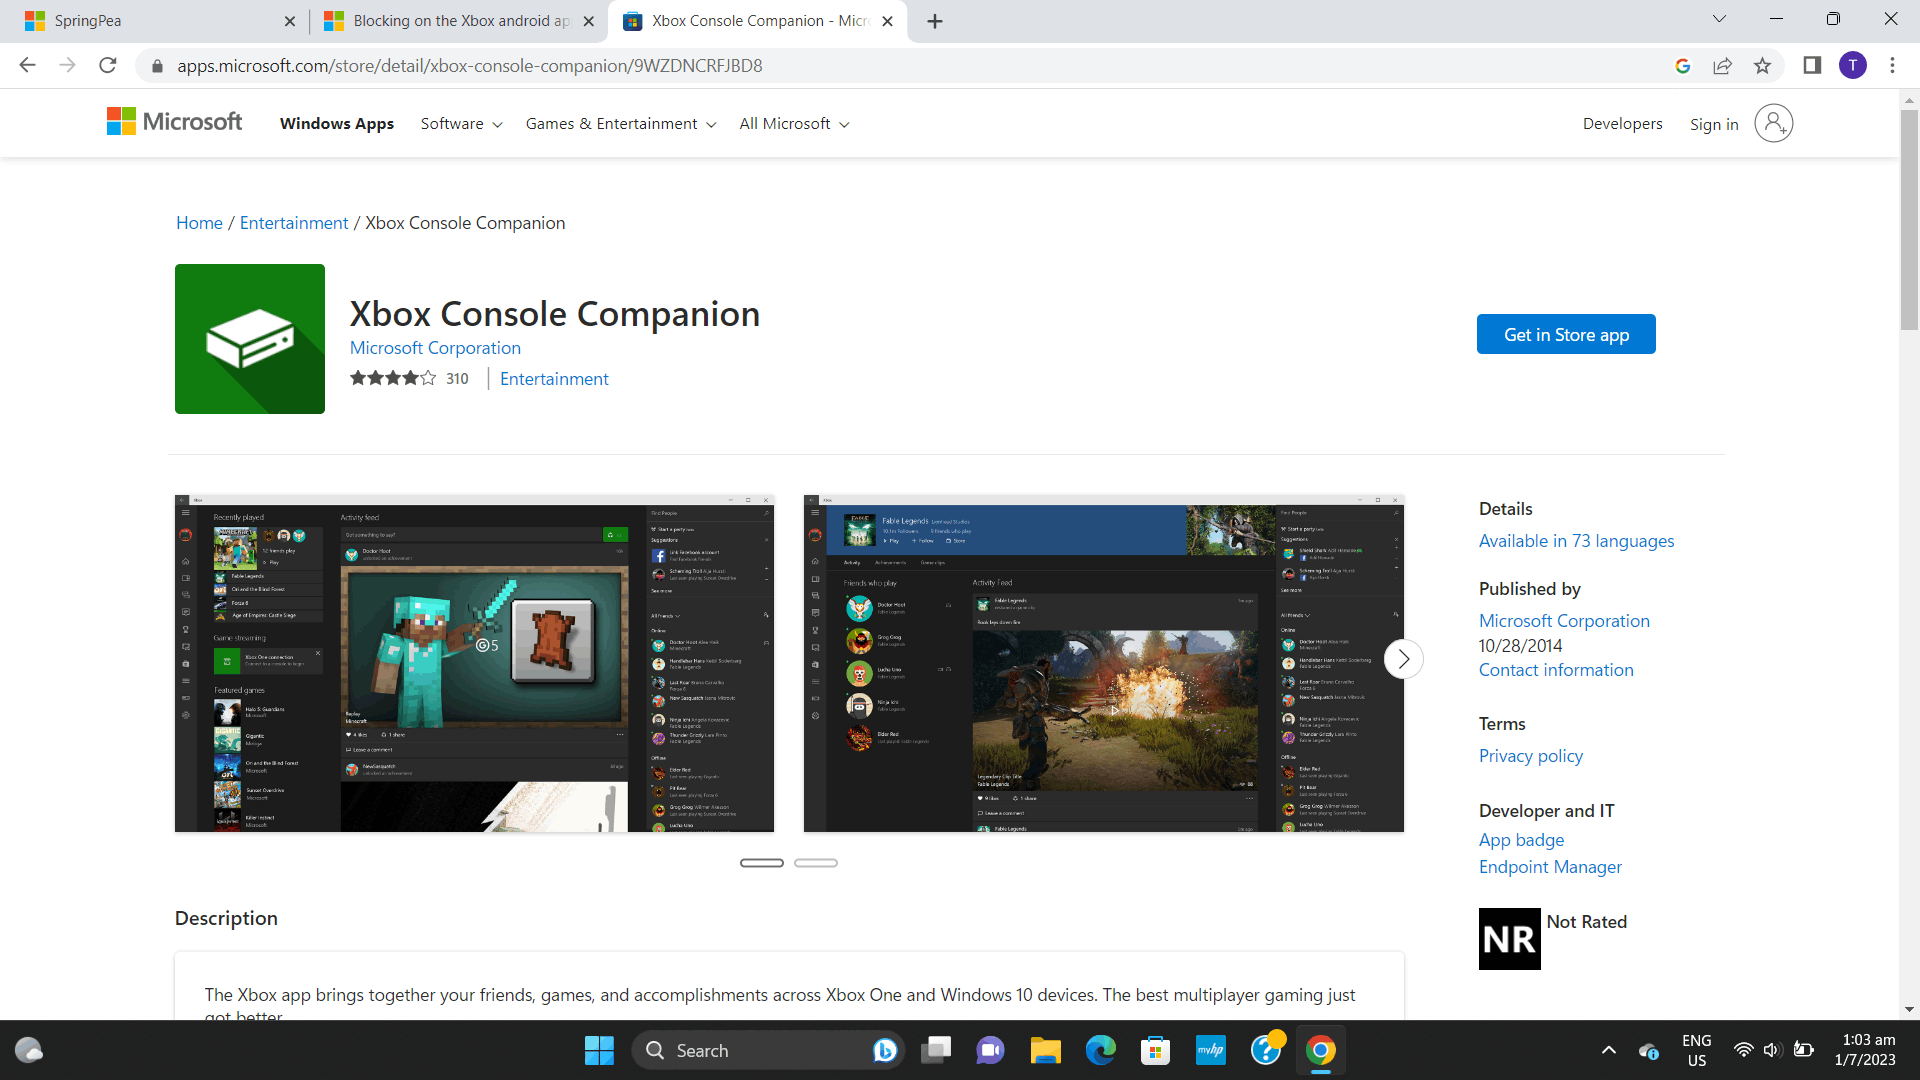 xbox console companion app removed from microsoft store [​IMG]